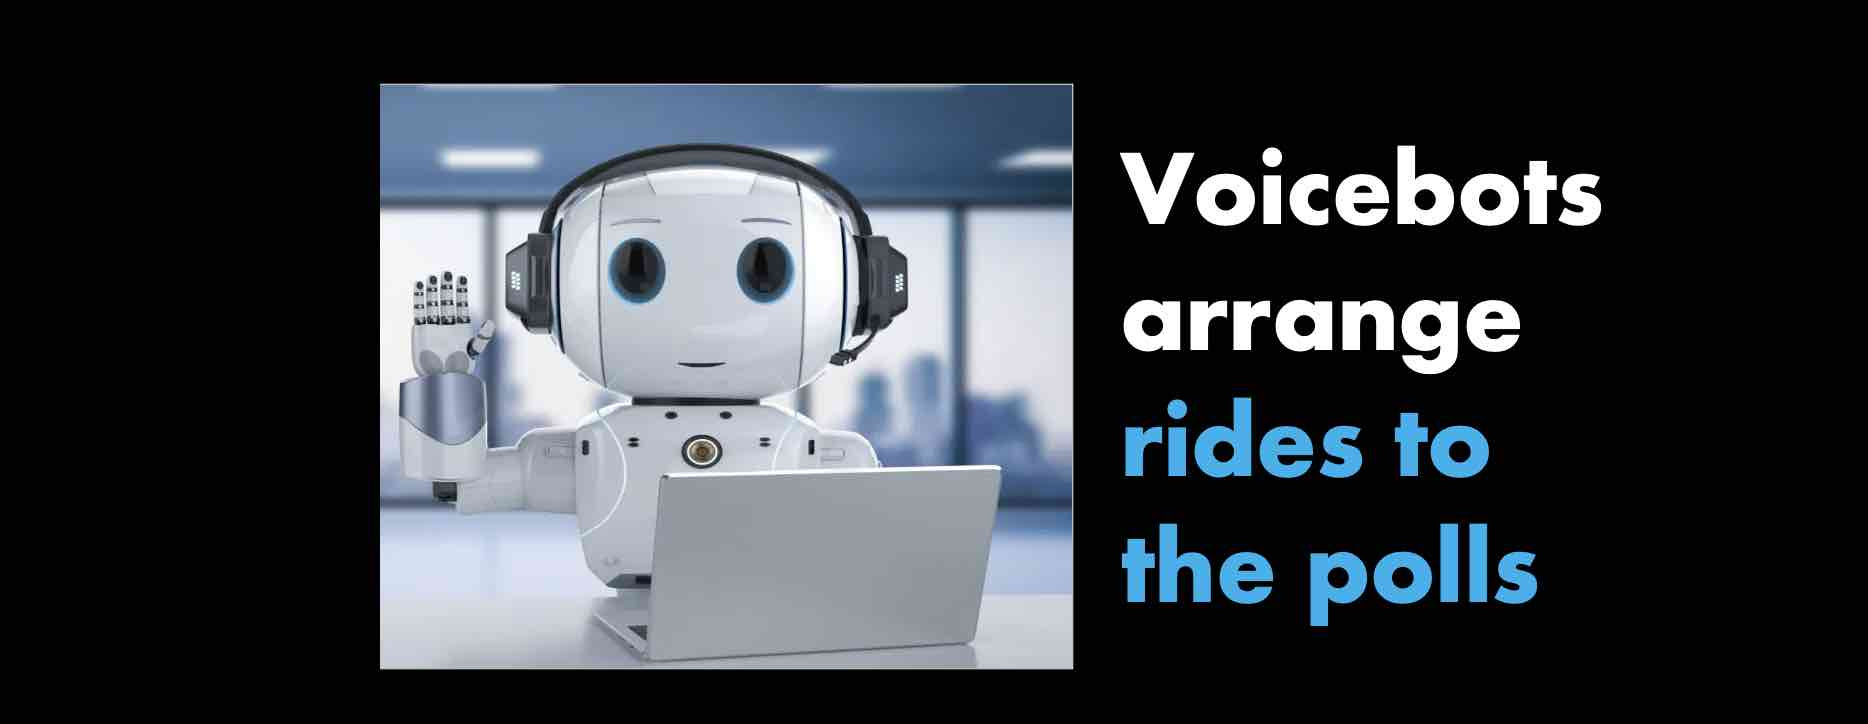 Voicebots make it easy to arrange rides to the polls